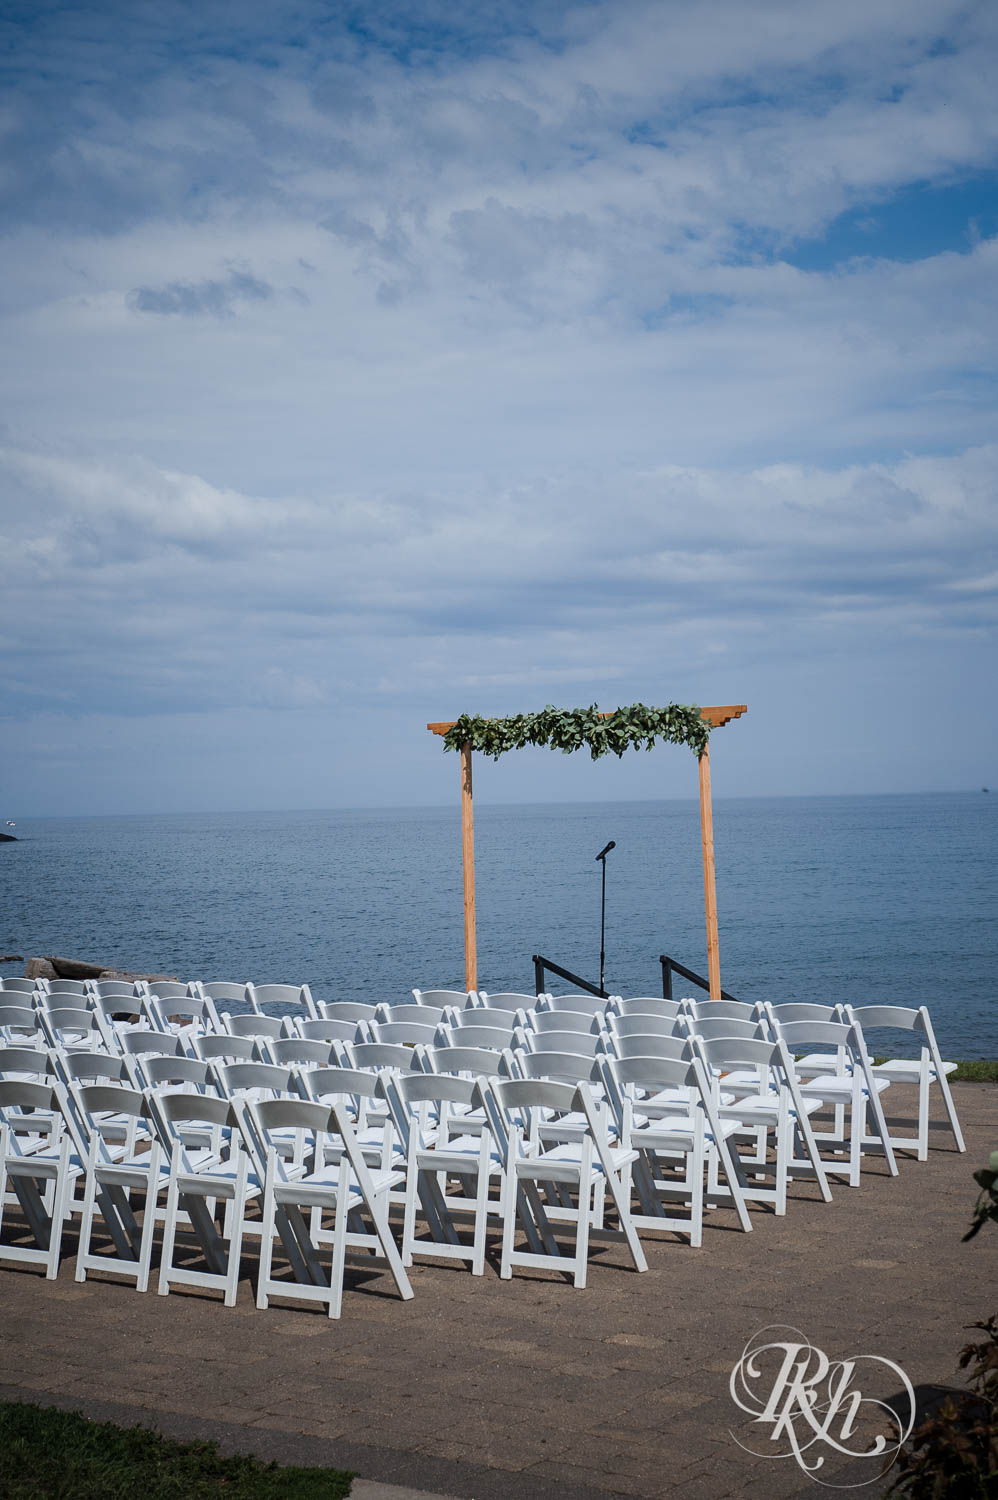 Outdoor ceremony space at a Bluefin Bay wedding in Tofte, Minnesota.